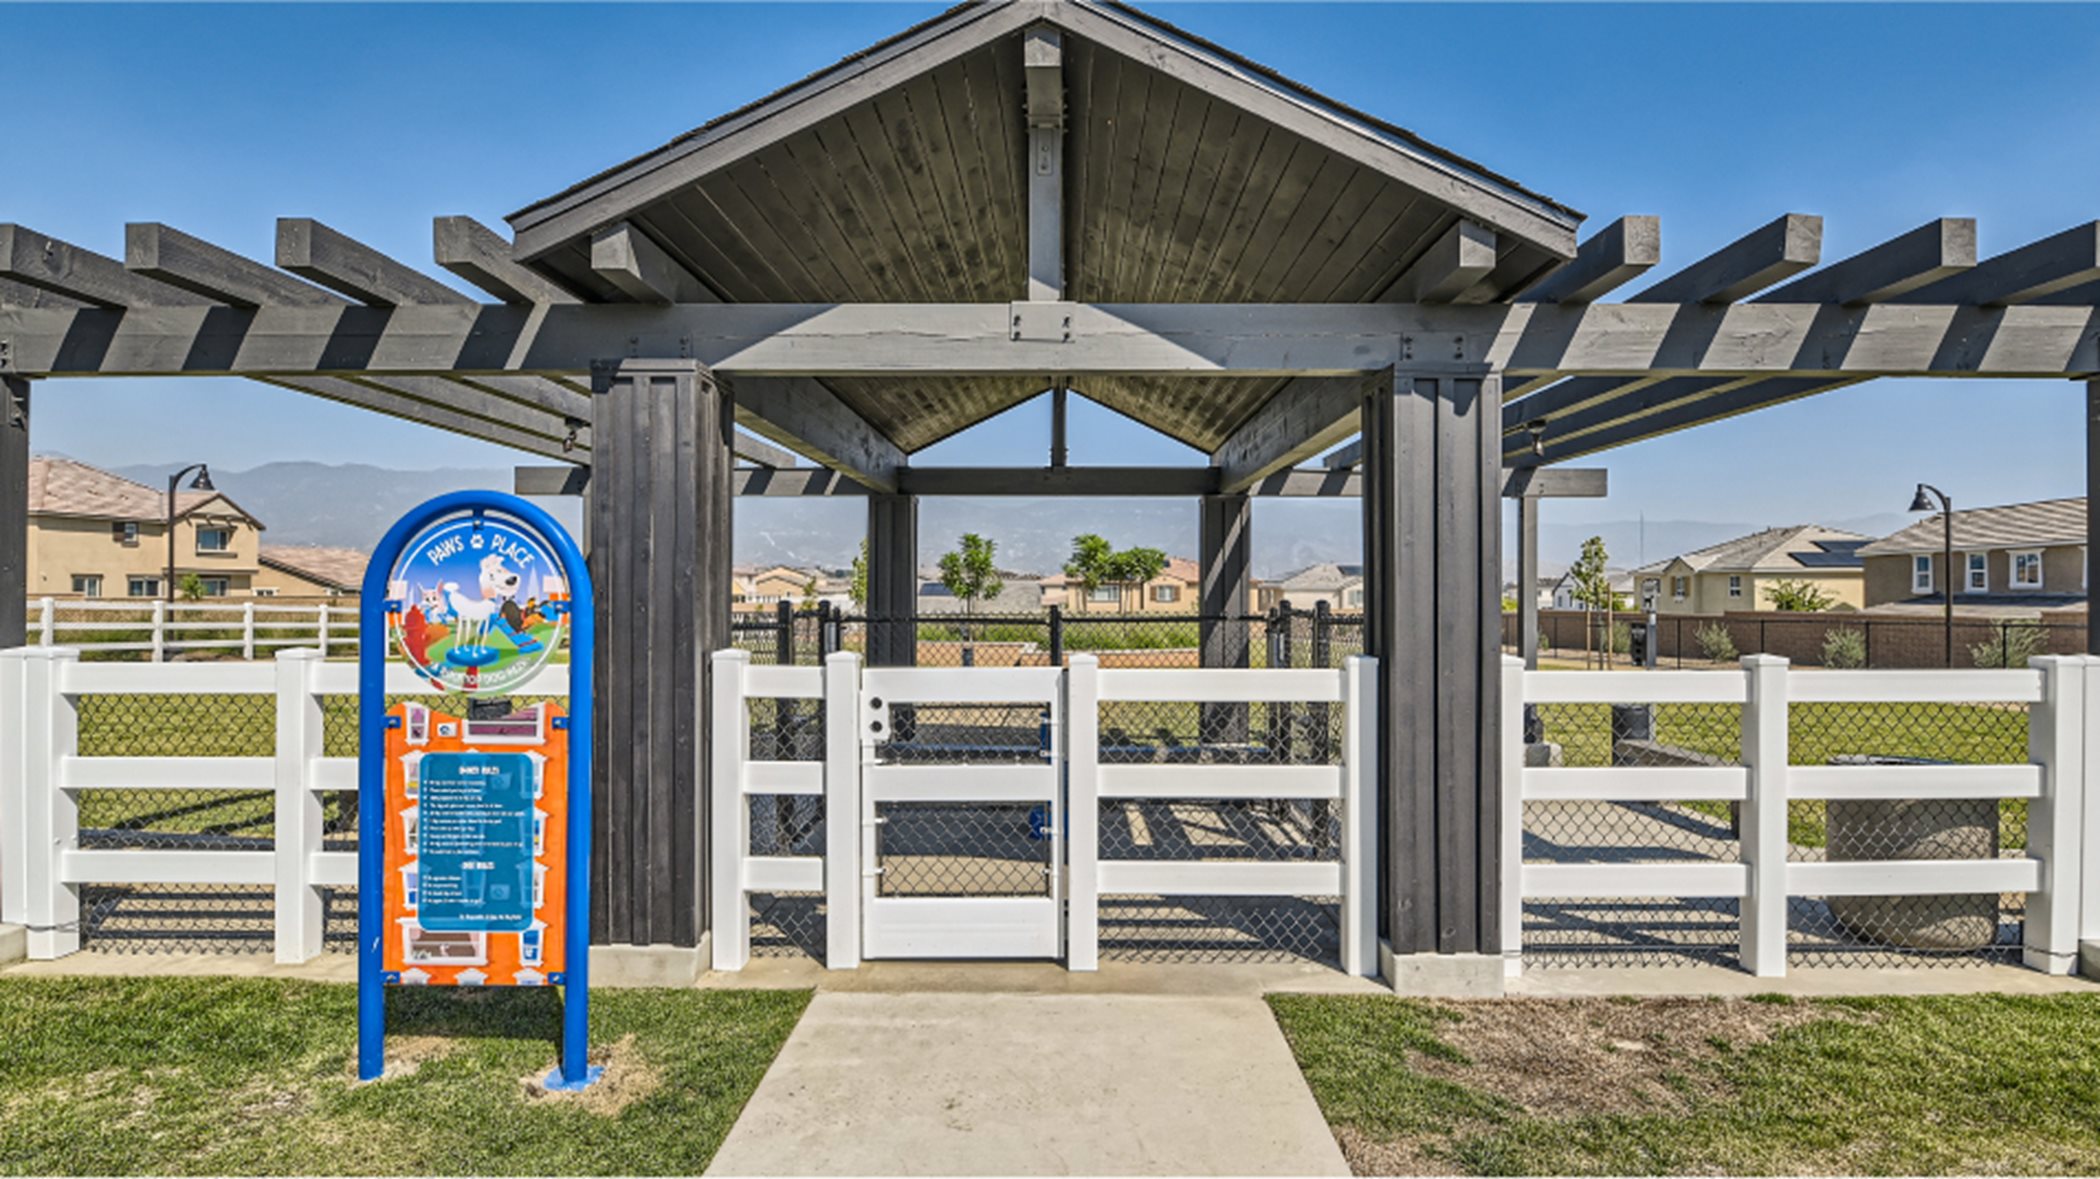 Entrance to the dog park